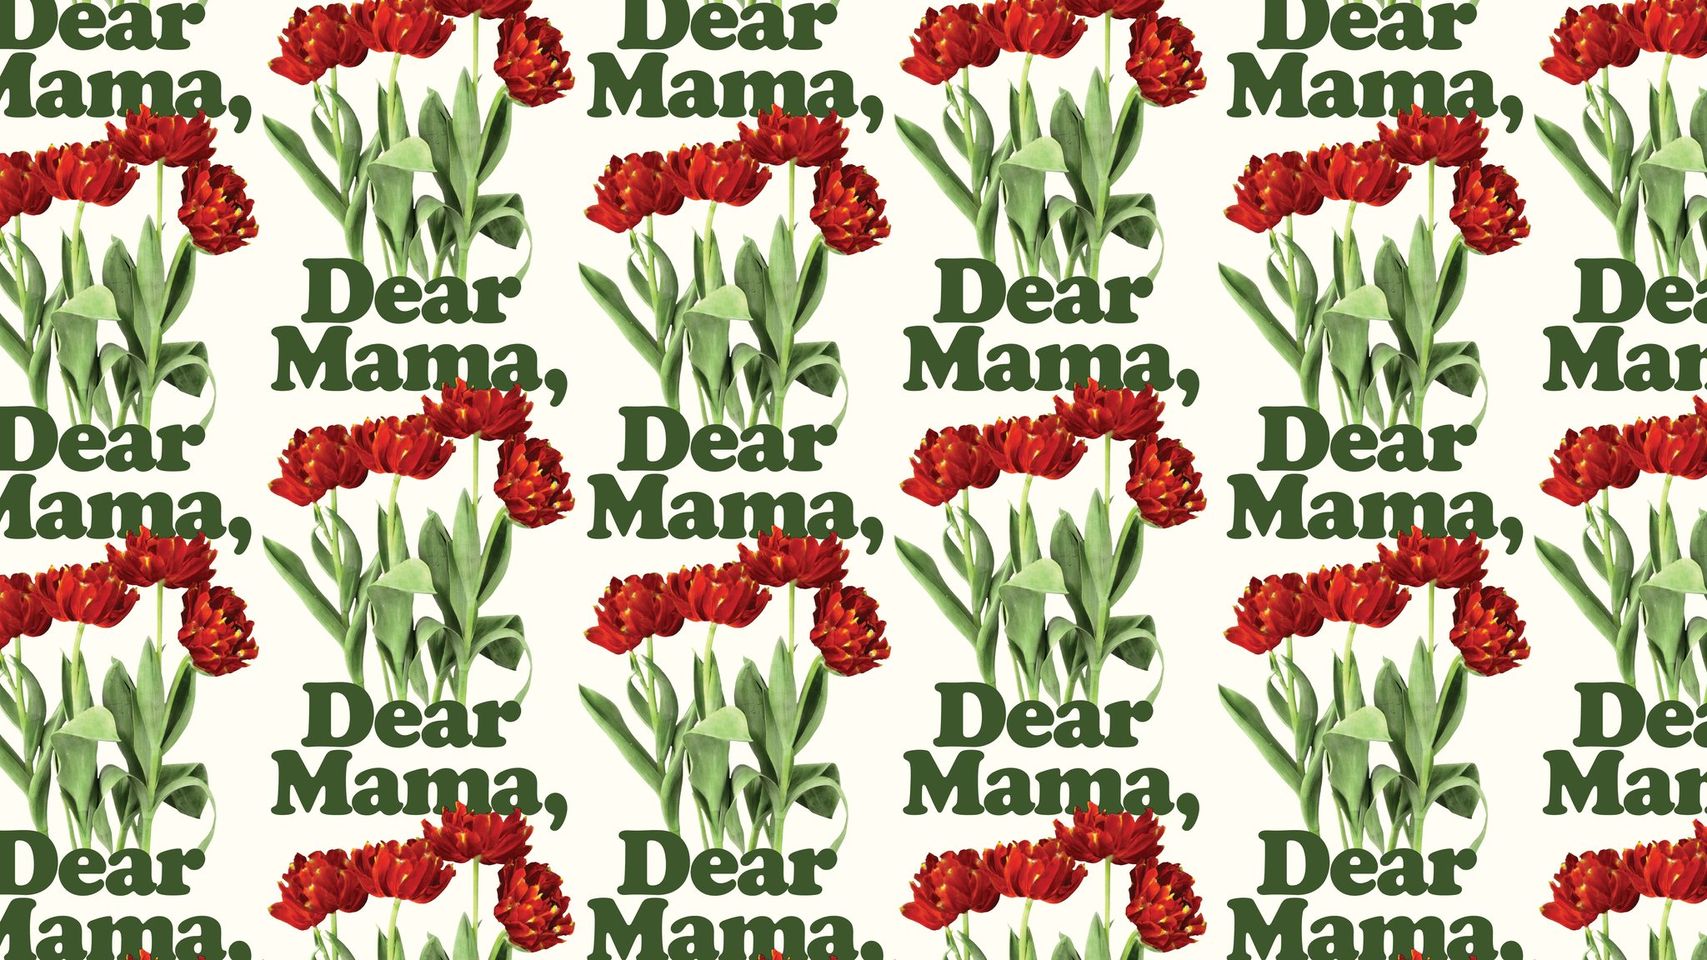 Dear Mama Pop Up Shop at Western Cider in Missoula from Noon to 4:00 pm on Saturday, May 13